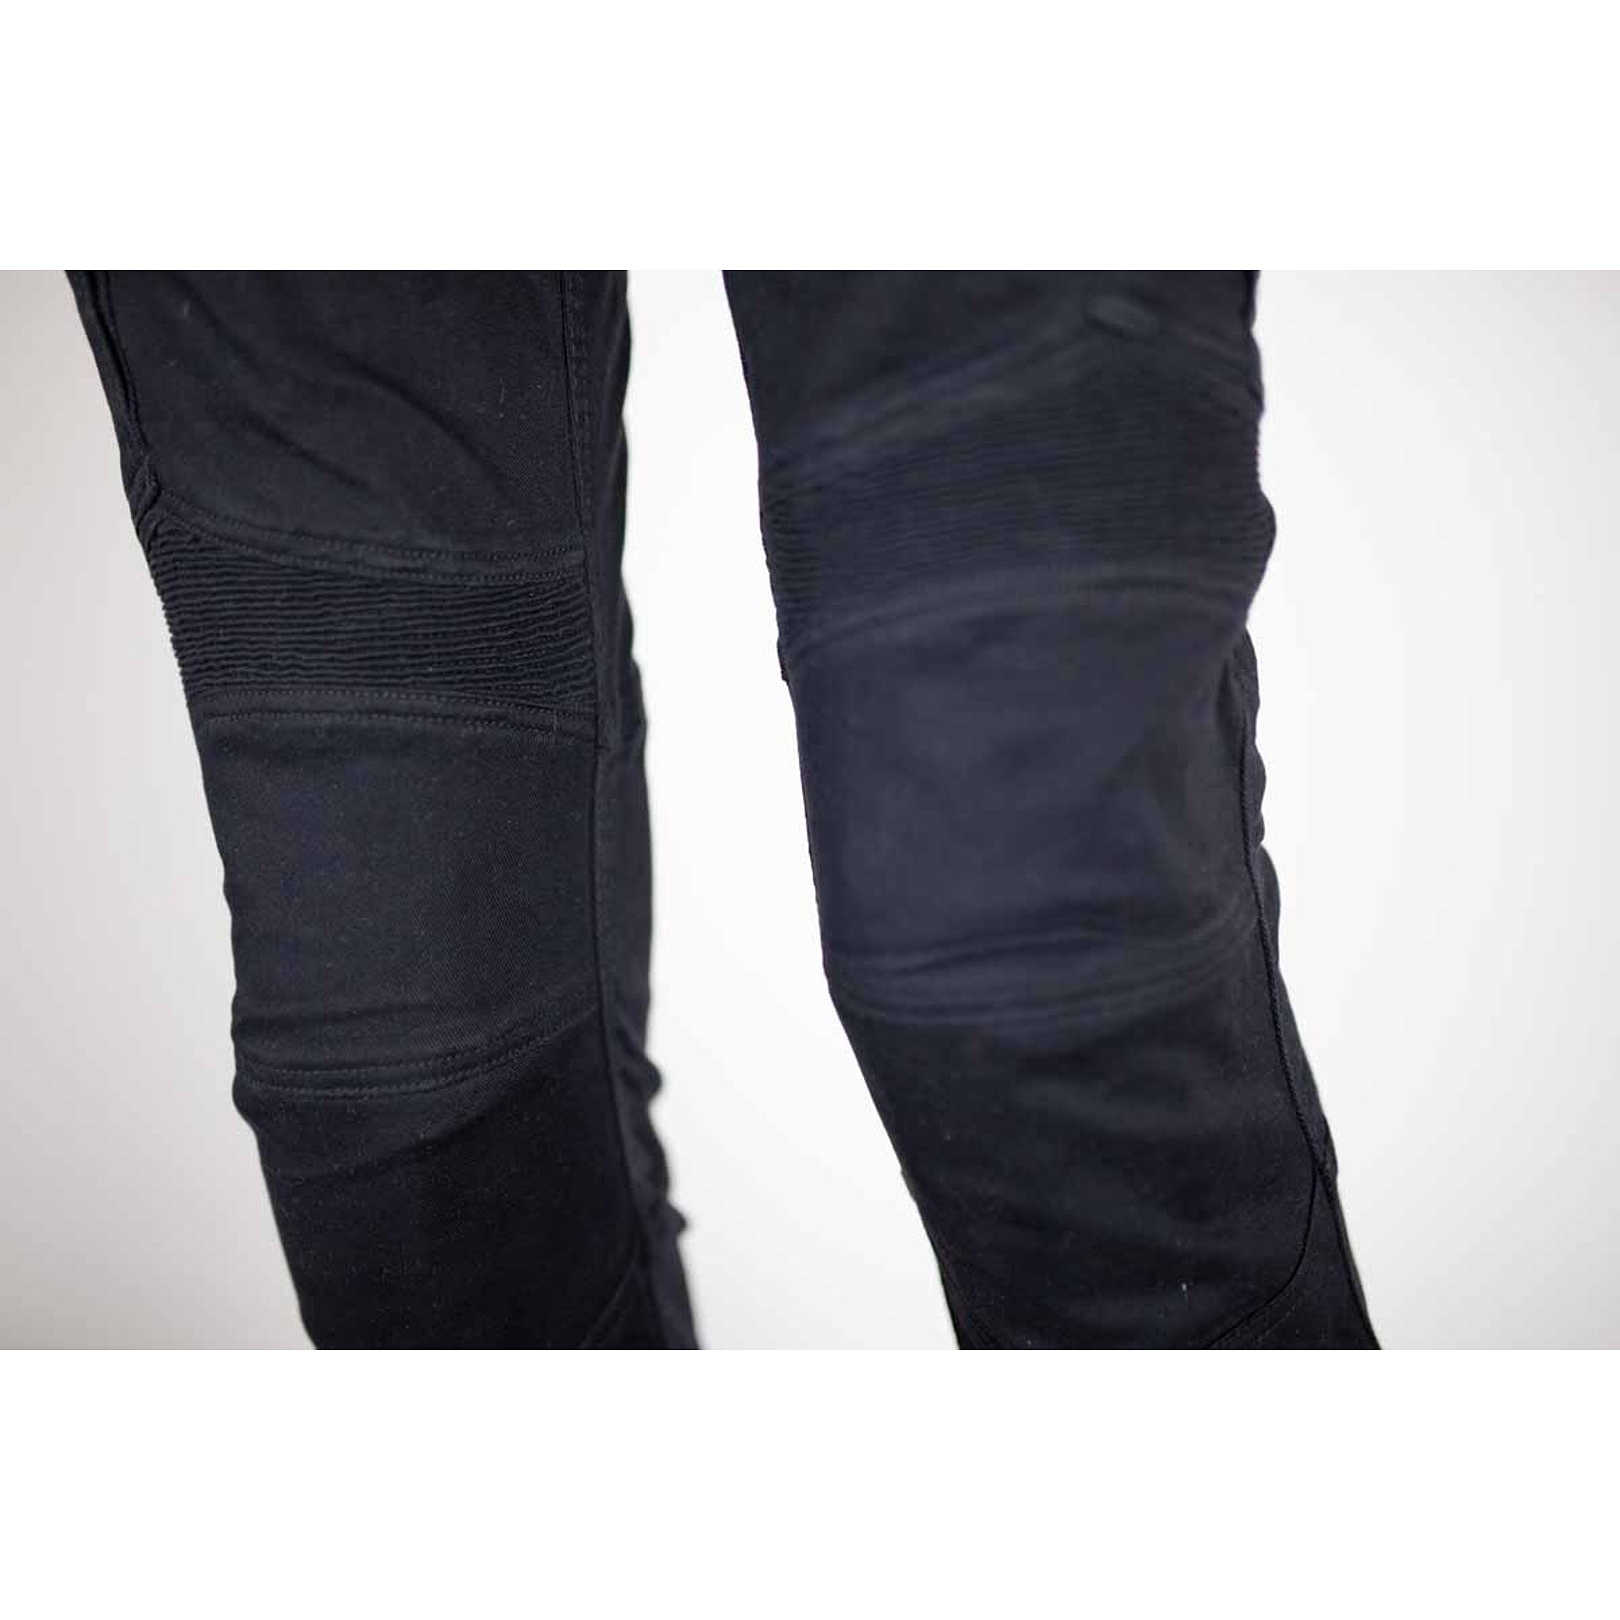 Skinny Mens Leather Pants  Stylish and Comfortable